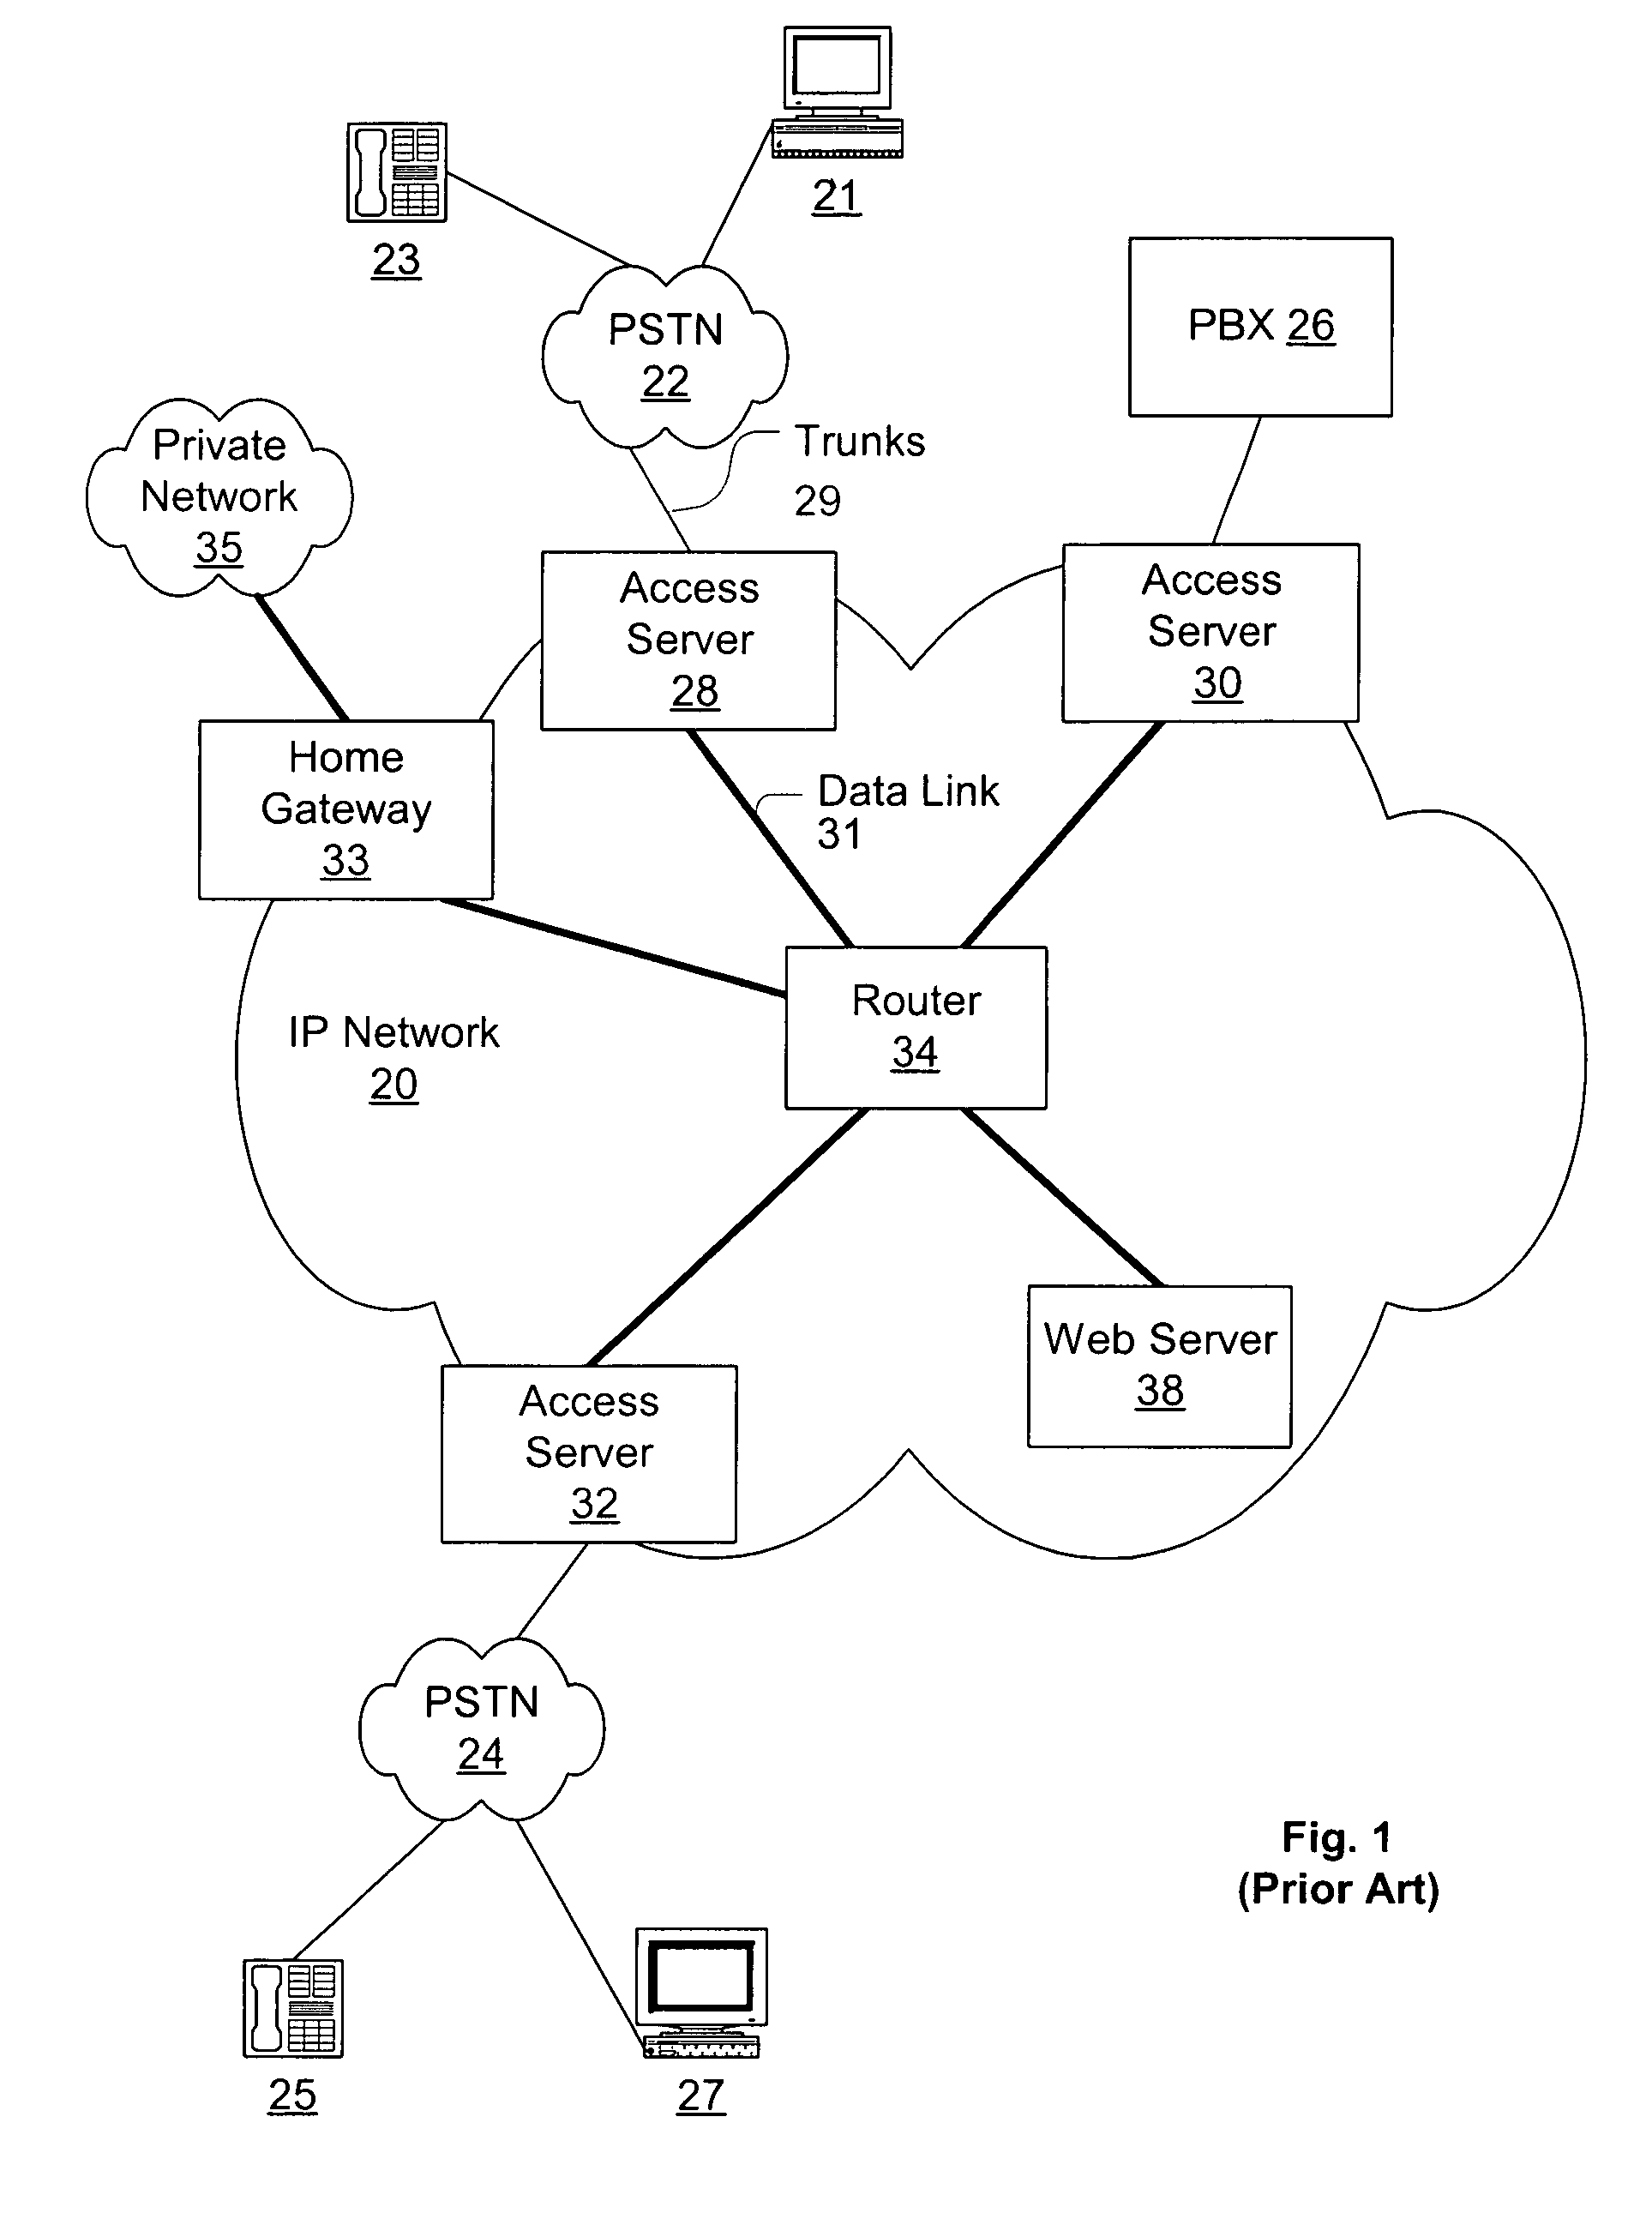 Distributed packet processing architecture for network access servers